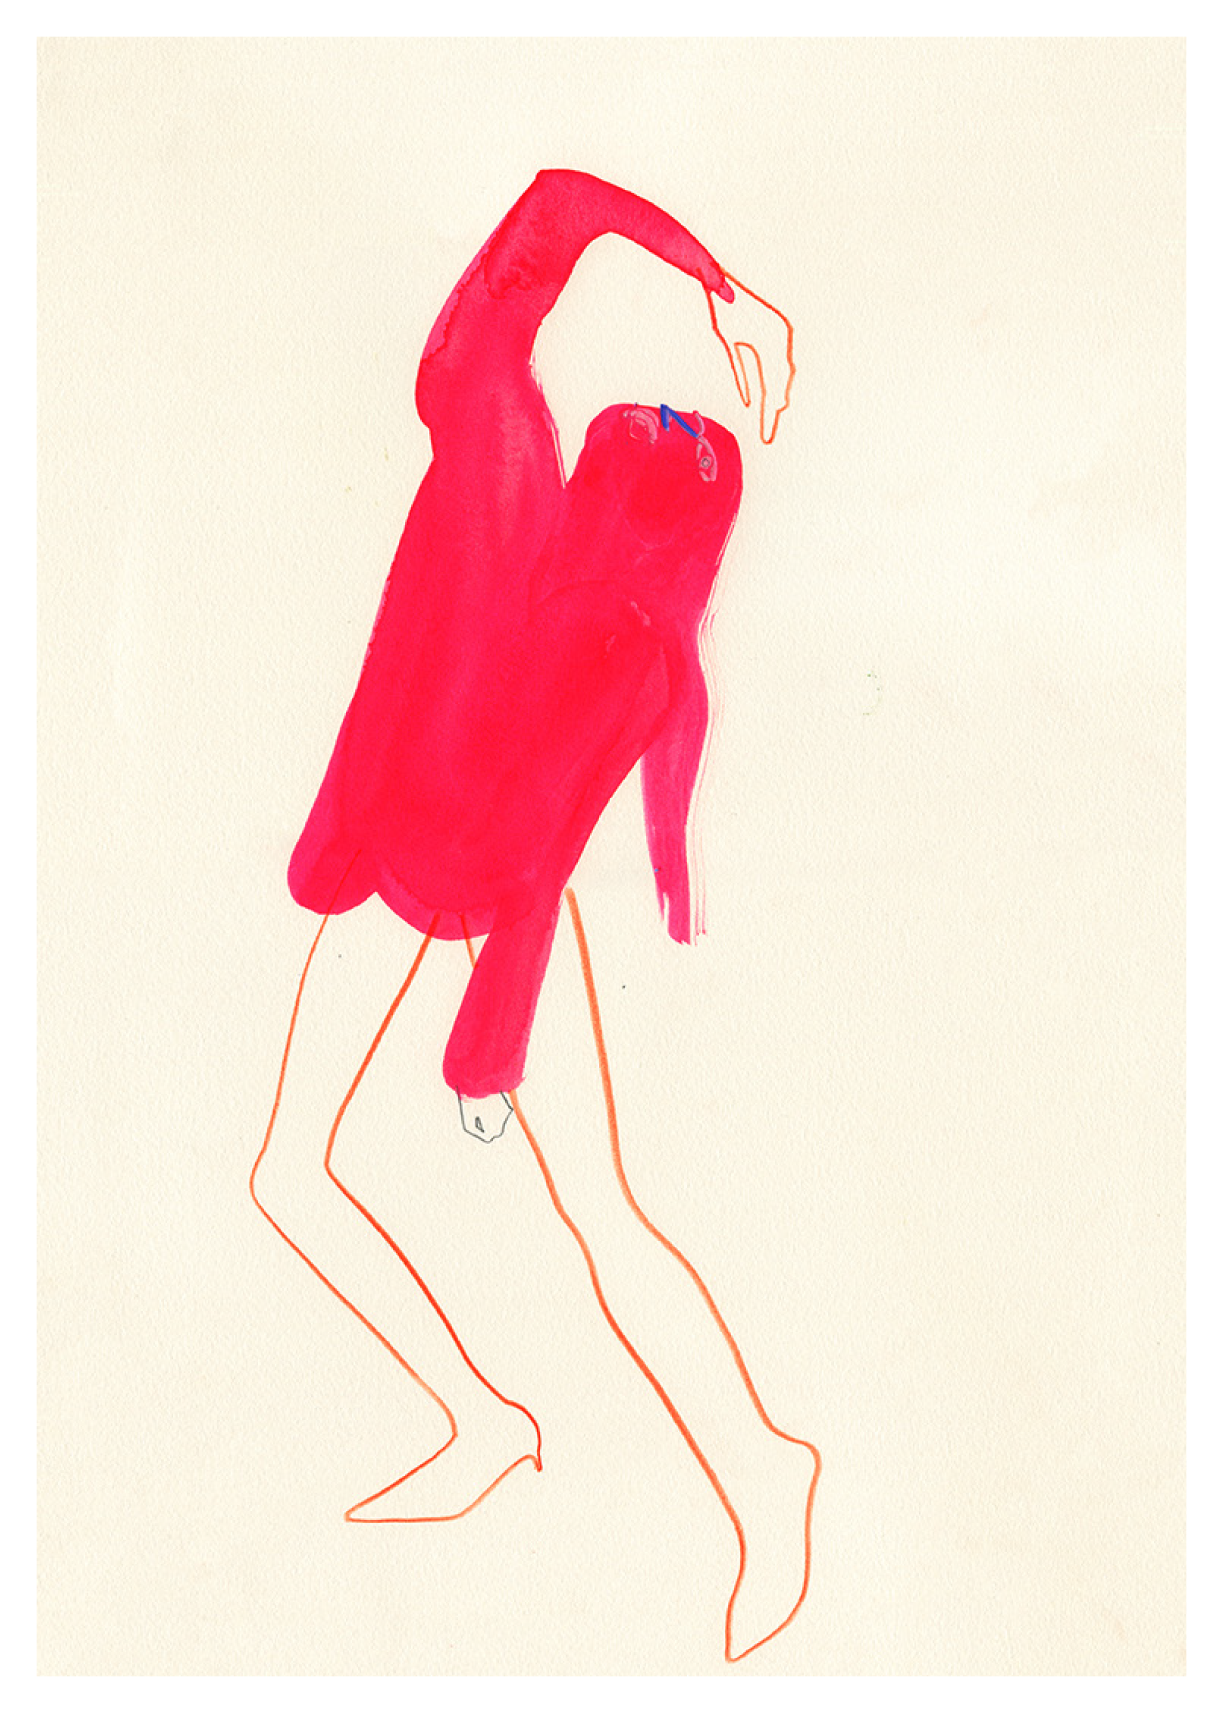 Print Poster | The Pink Pose - 30x40